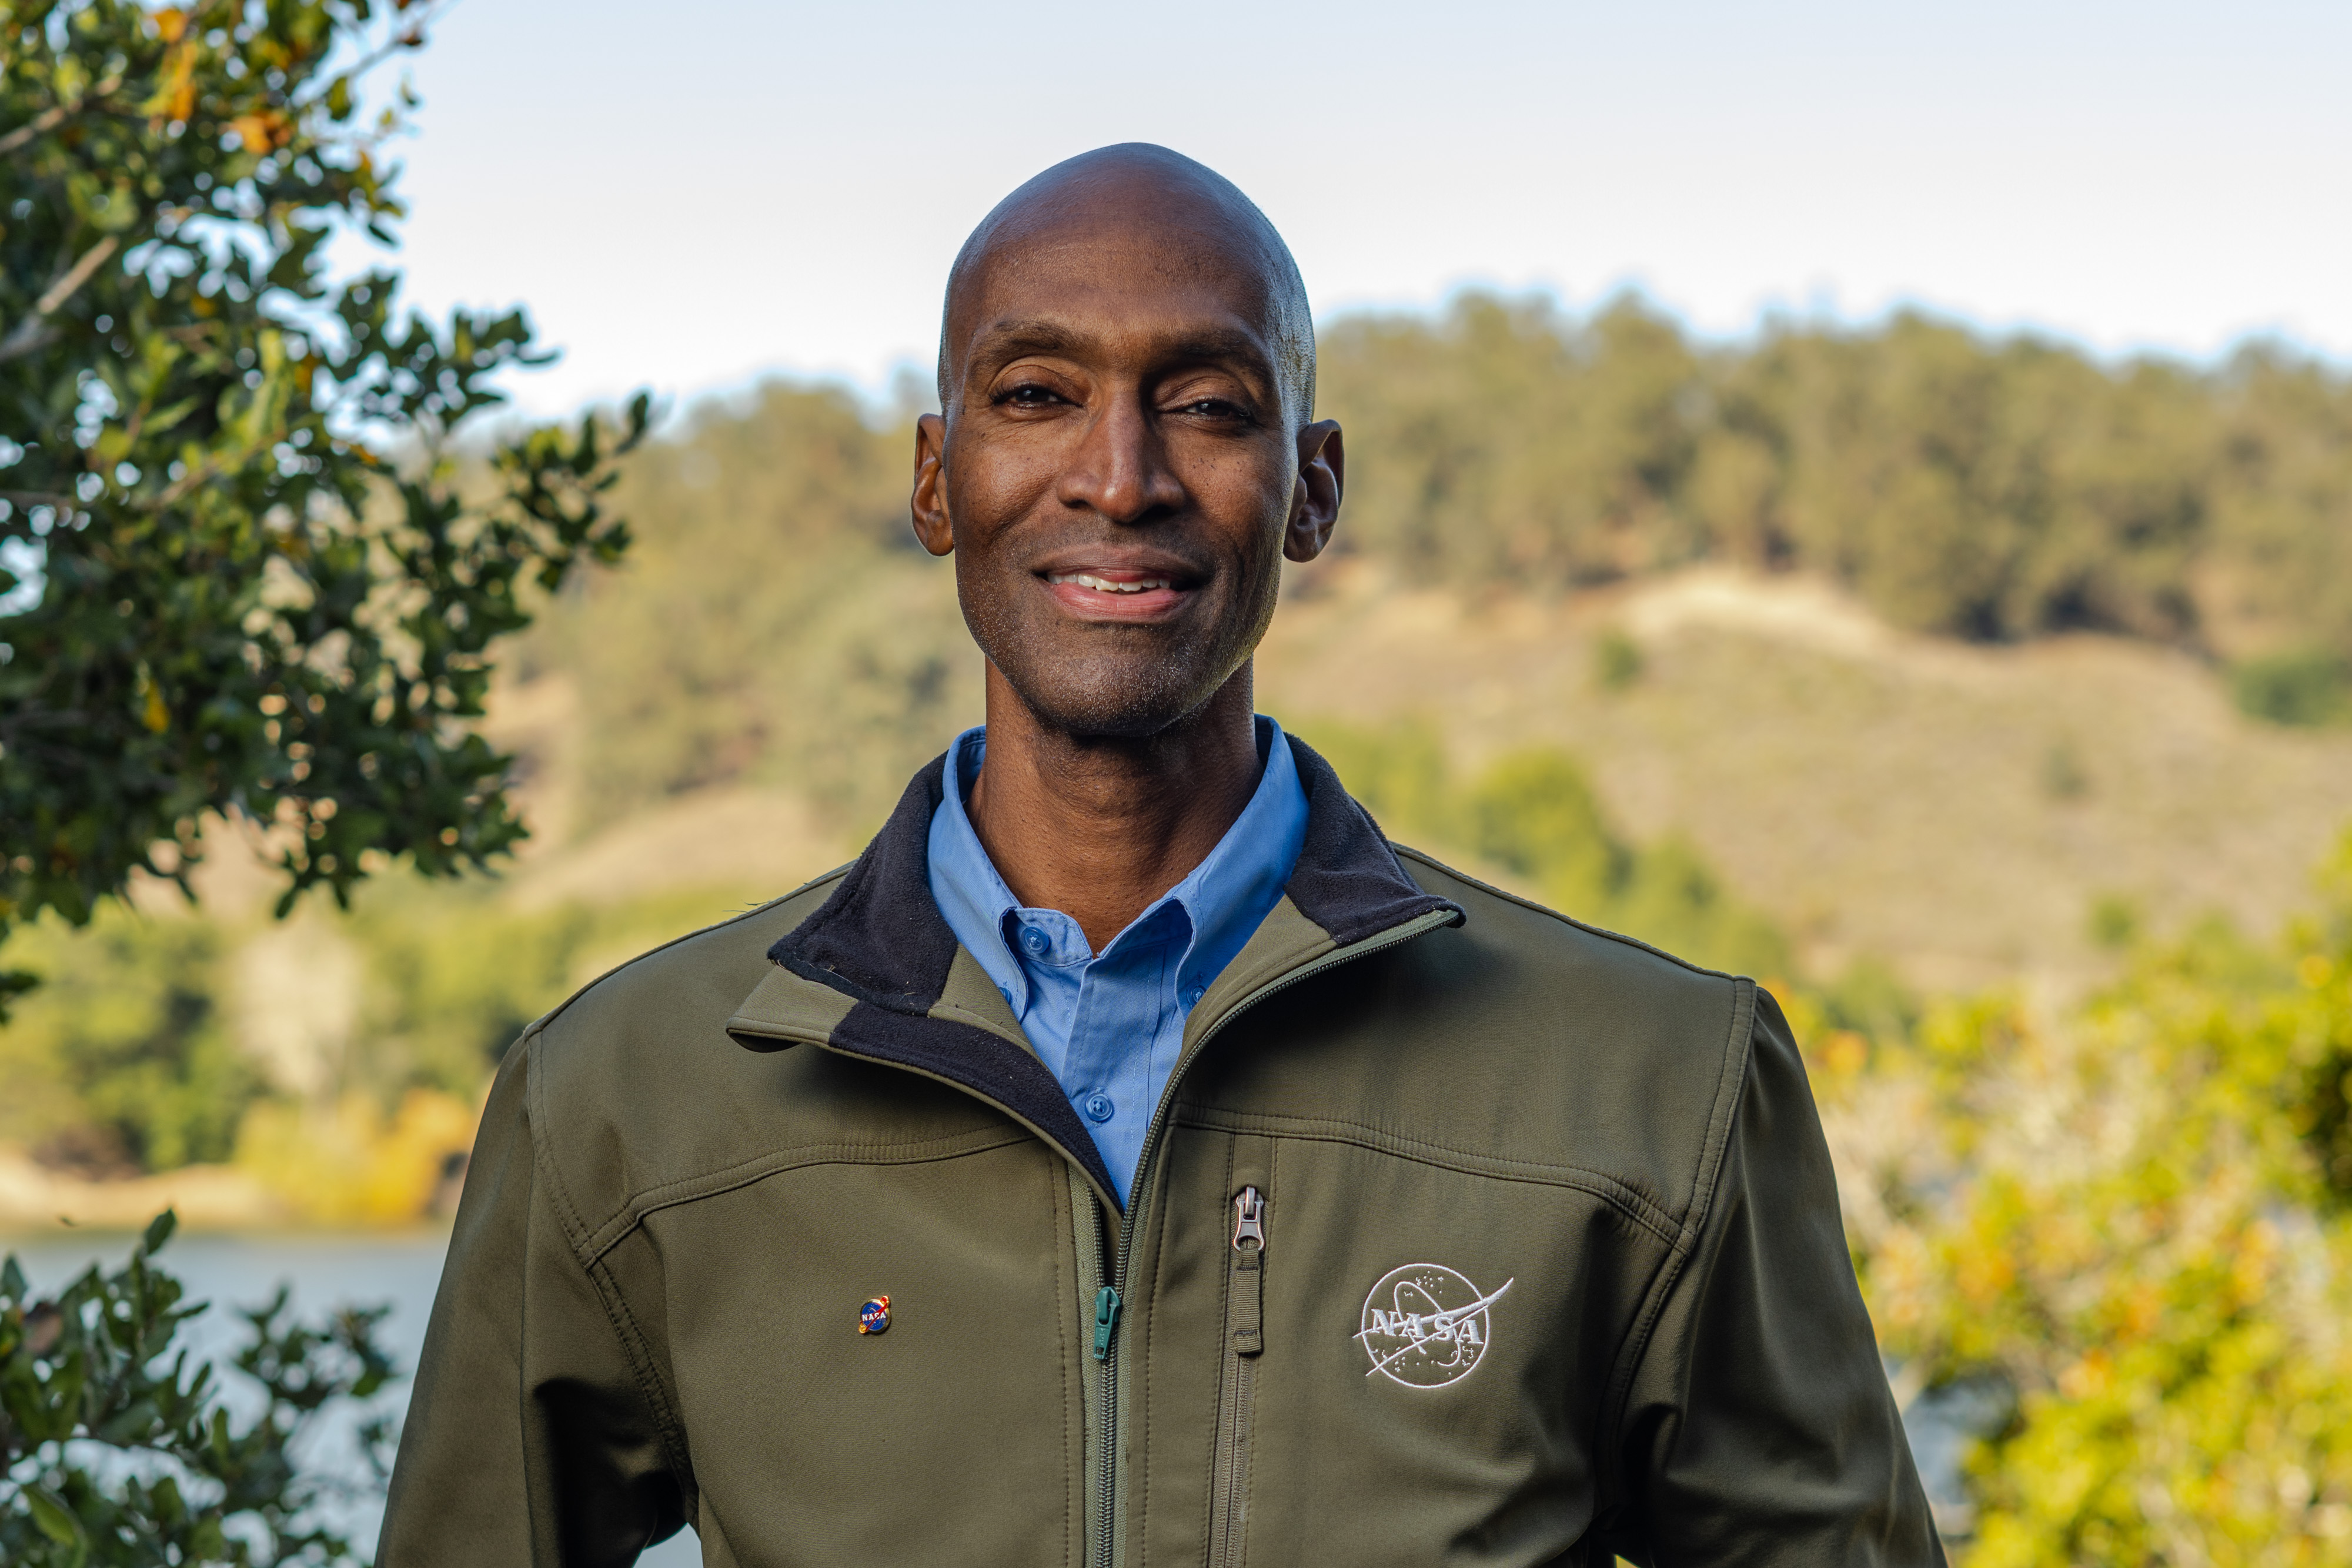 Rodney Martin, wearing an olive-colored NASA jacket and a blue dress shirt underneath, smiles at the camera. He is standing in the foreground with Lake Chabot Park in the background.